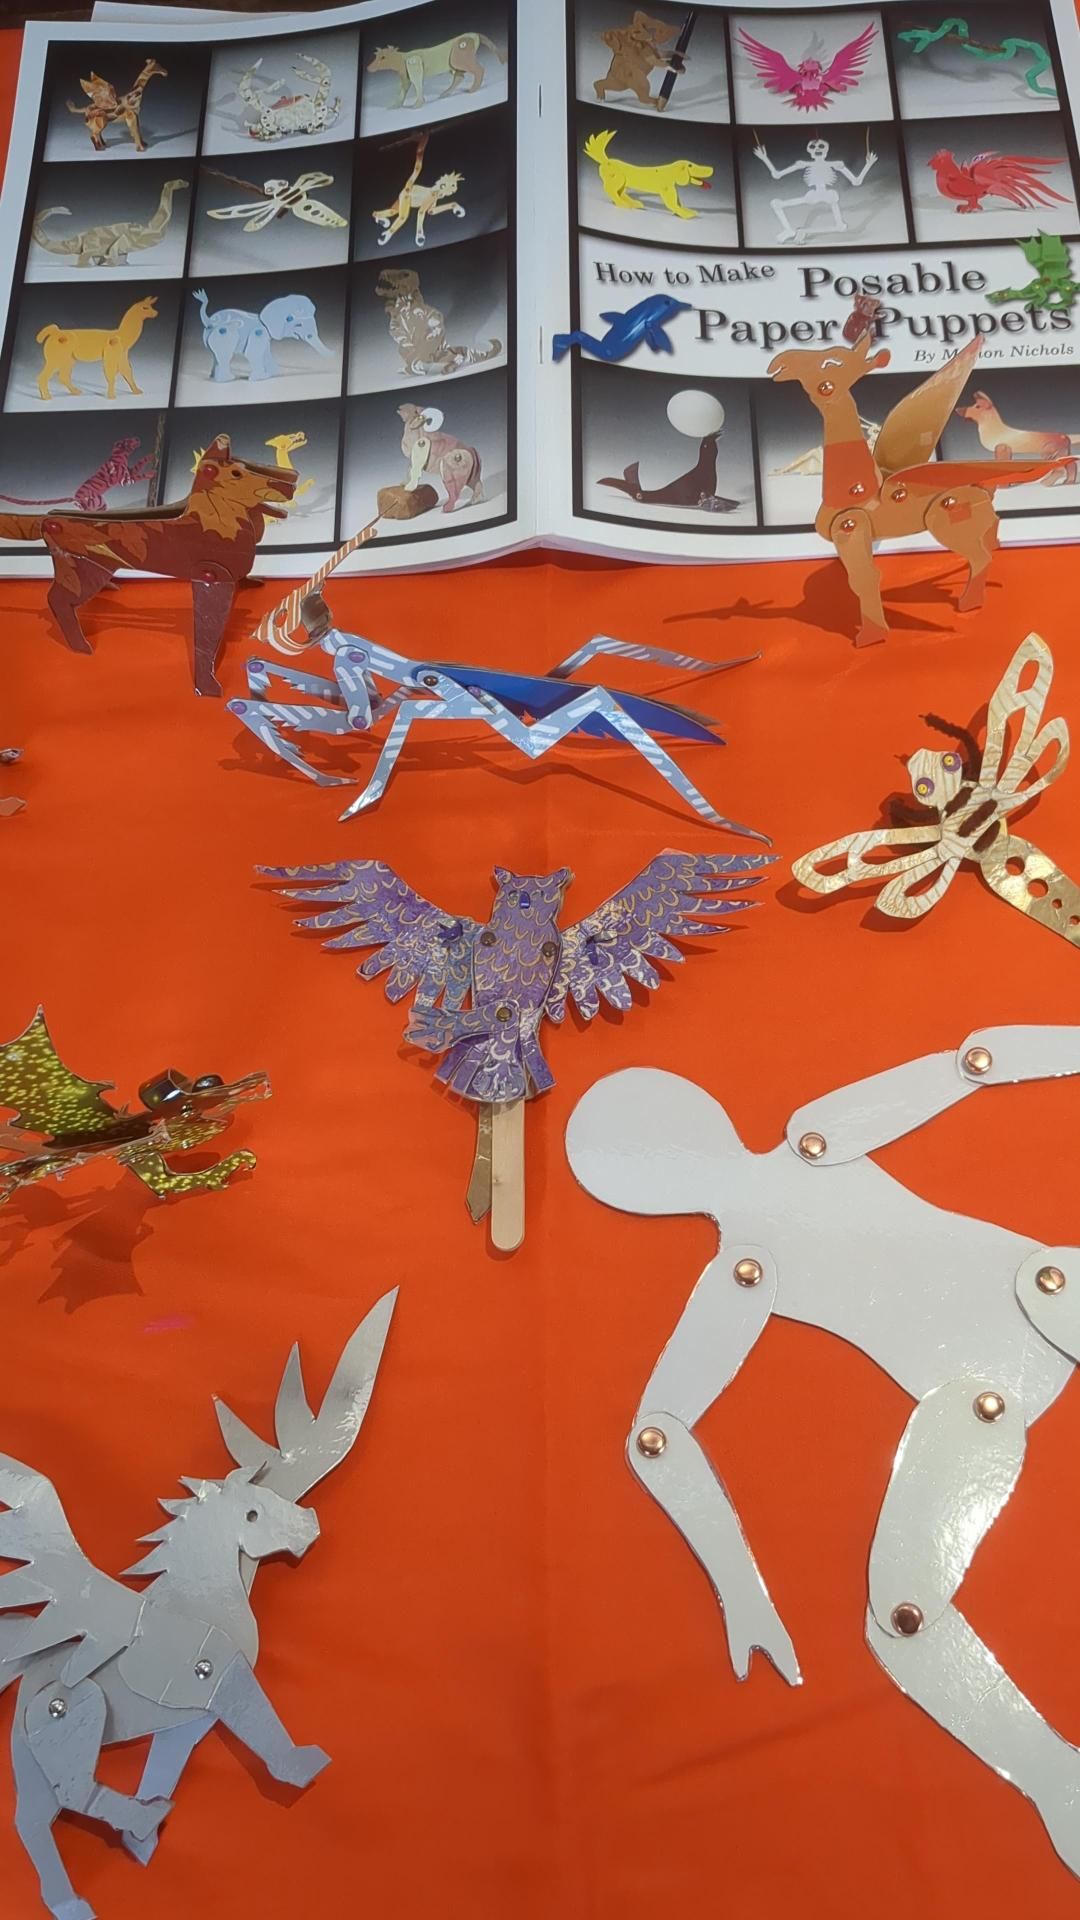 Posable Paper Puppets, with Marion Nichols